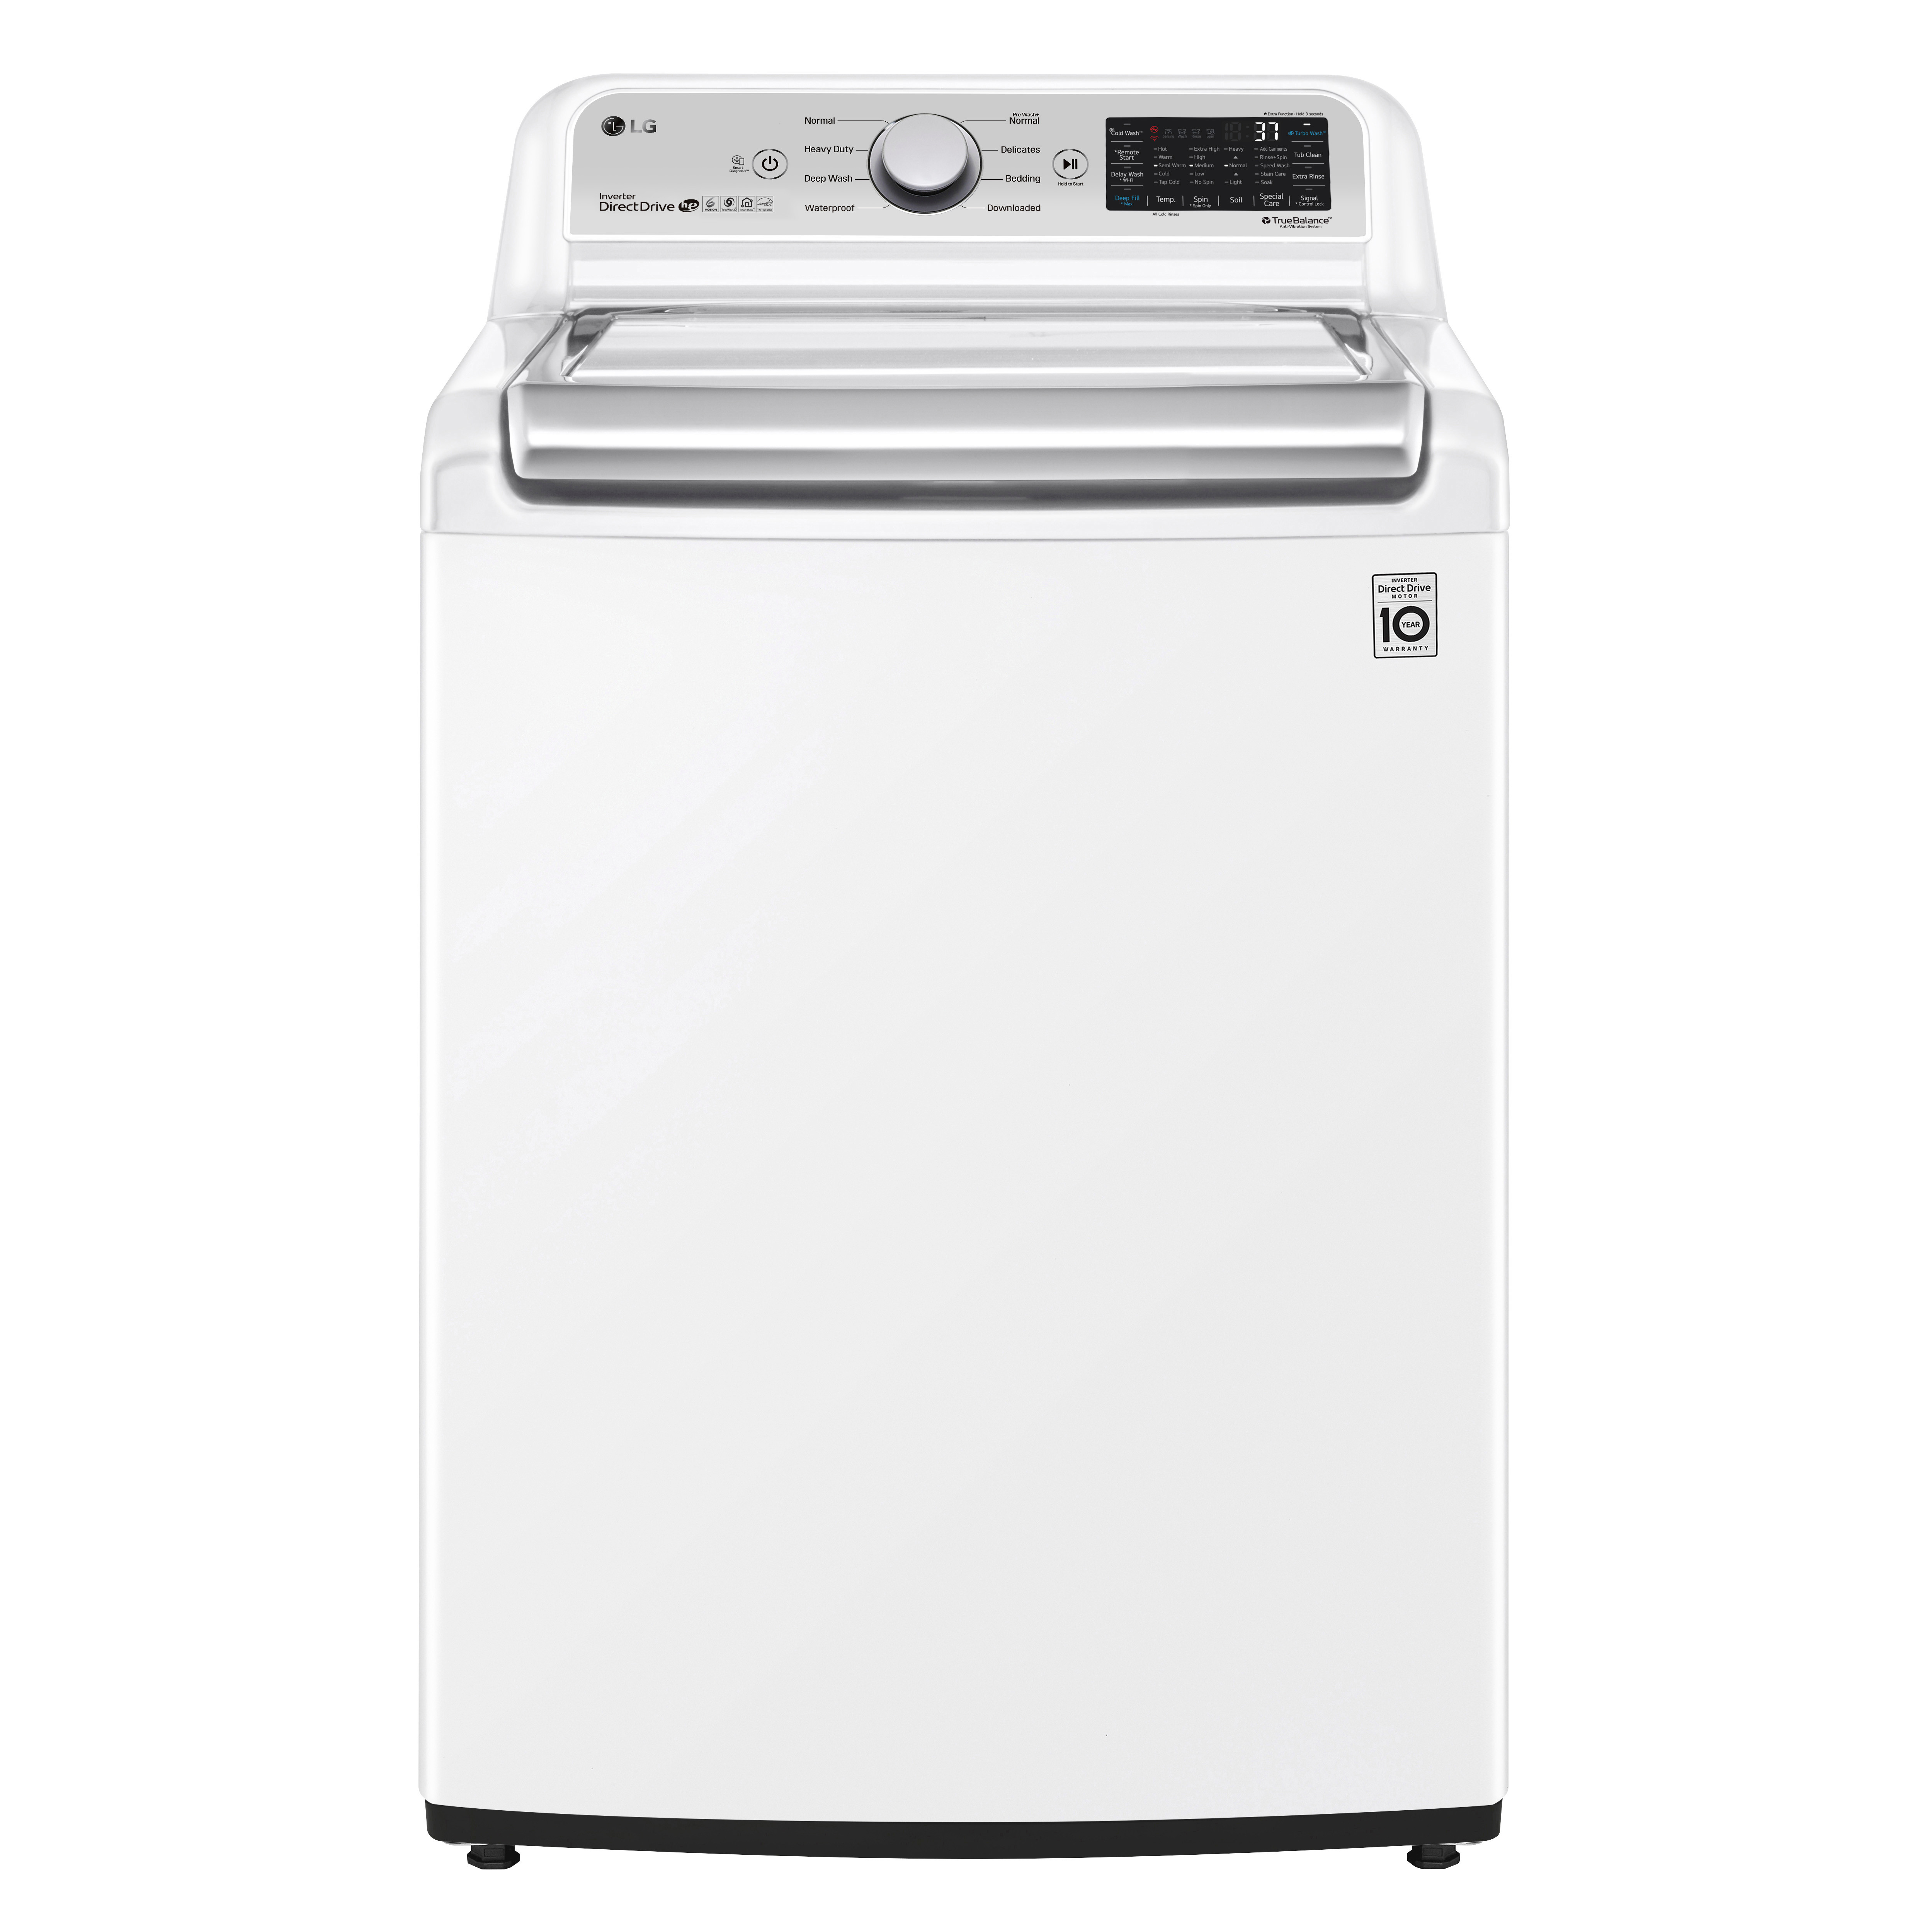 white LG top washer with warranty sticker on front